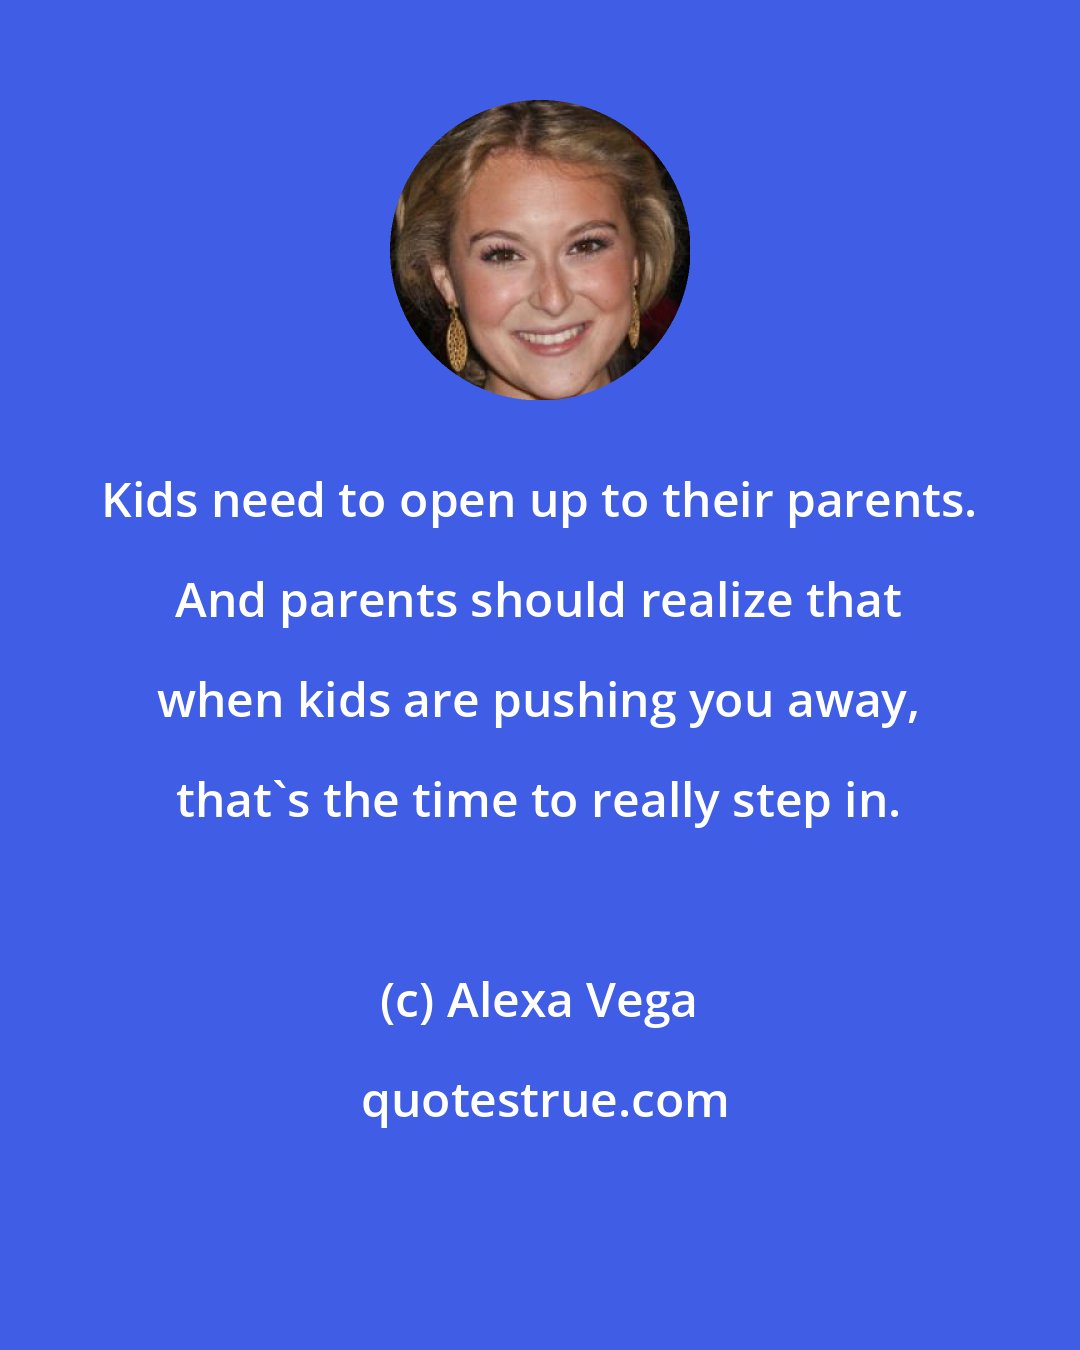 Alexa Vega: Kids need to open up to their parents. And parents should realize that when kids are pushing you away, that's the time to really step in.